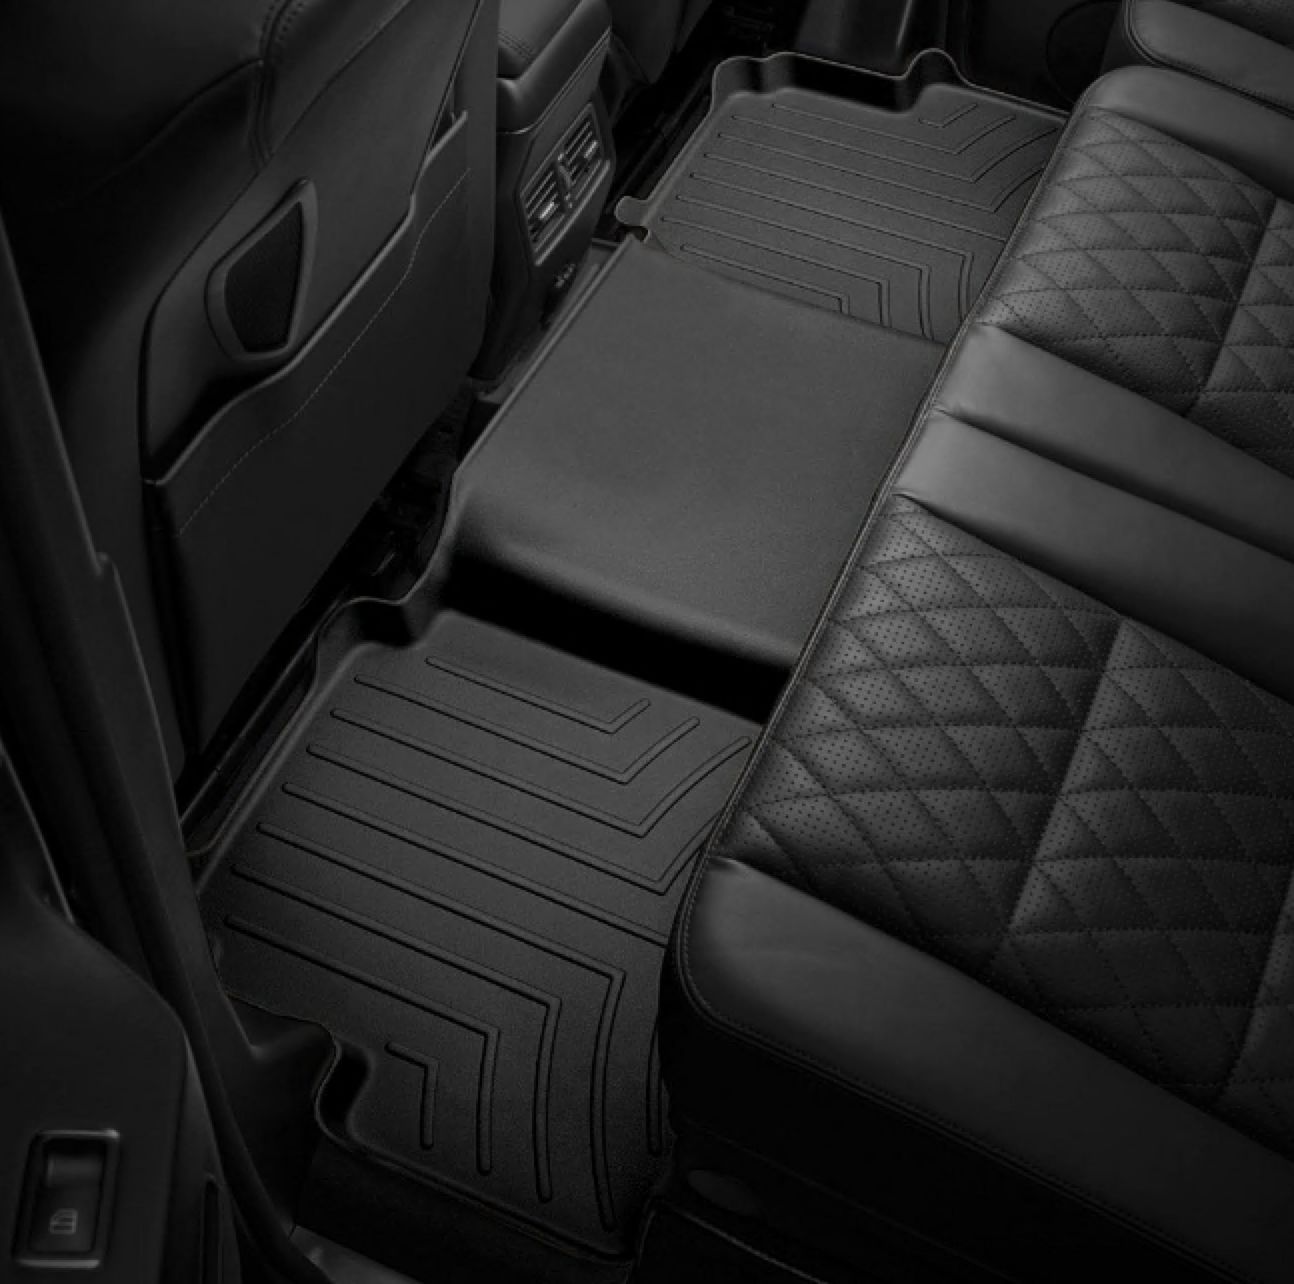 Weathertech® • 4411842 • FloorLiner • Molded Floor Liners • Black • Second Row • Maserati Levante 17-22 without Four-Climate Air Conditioning System